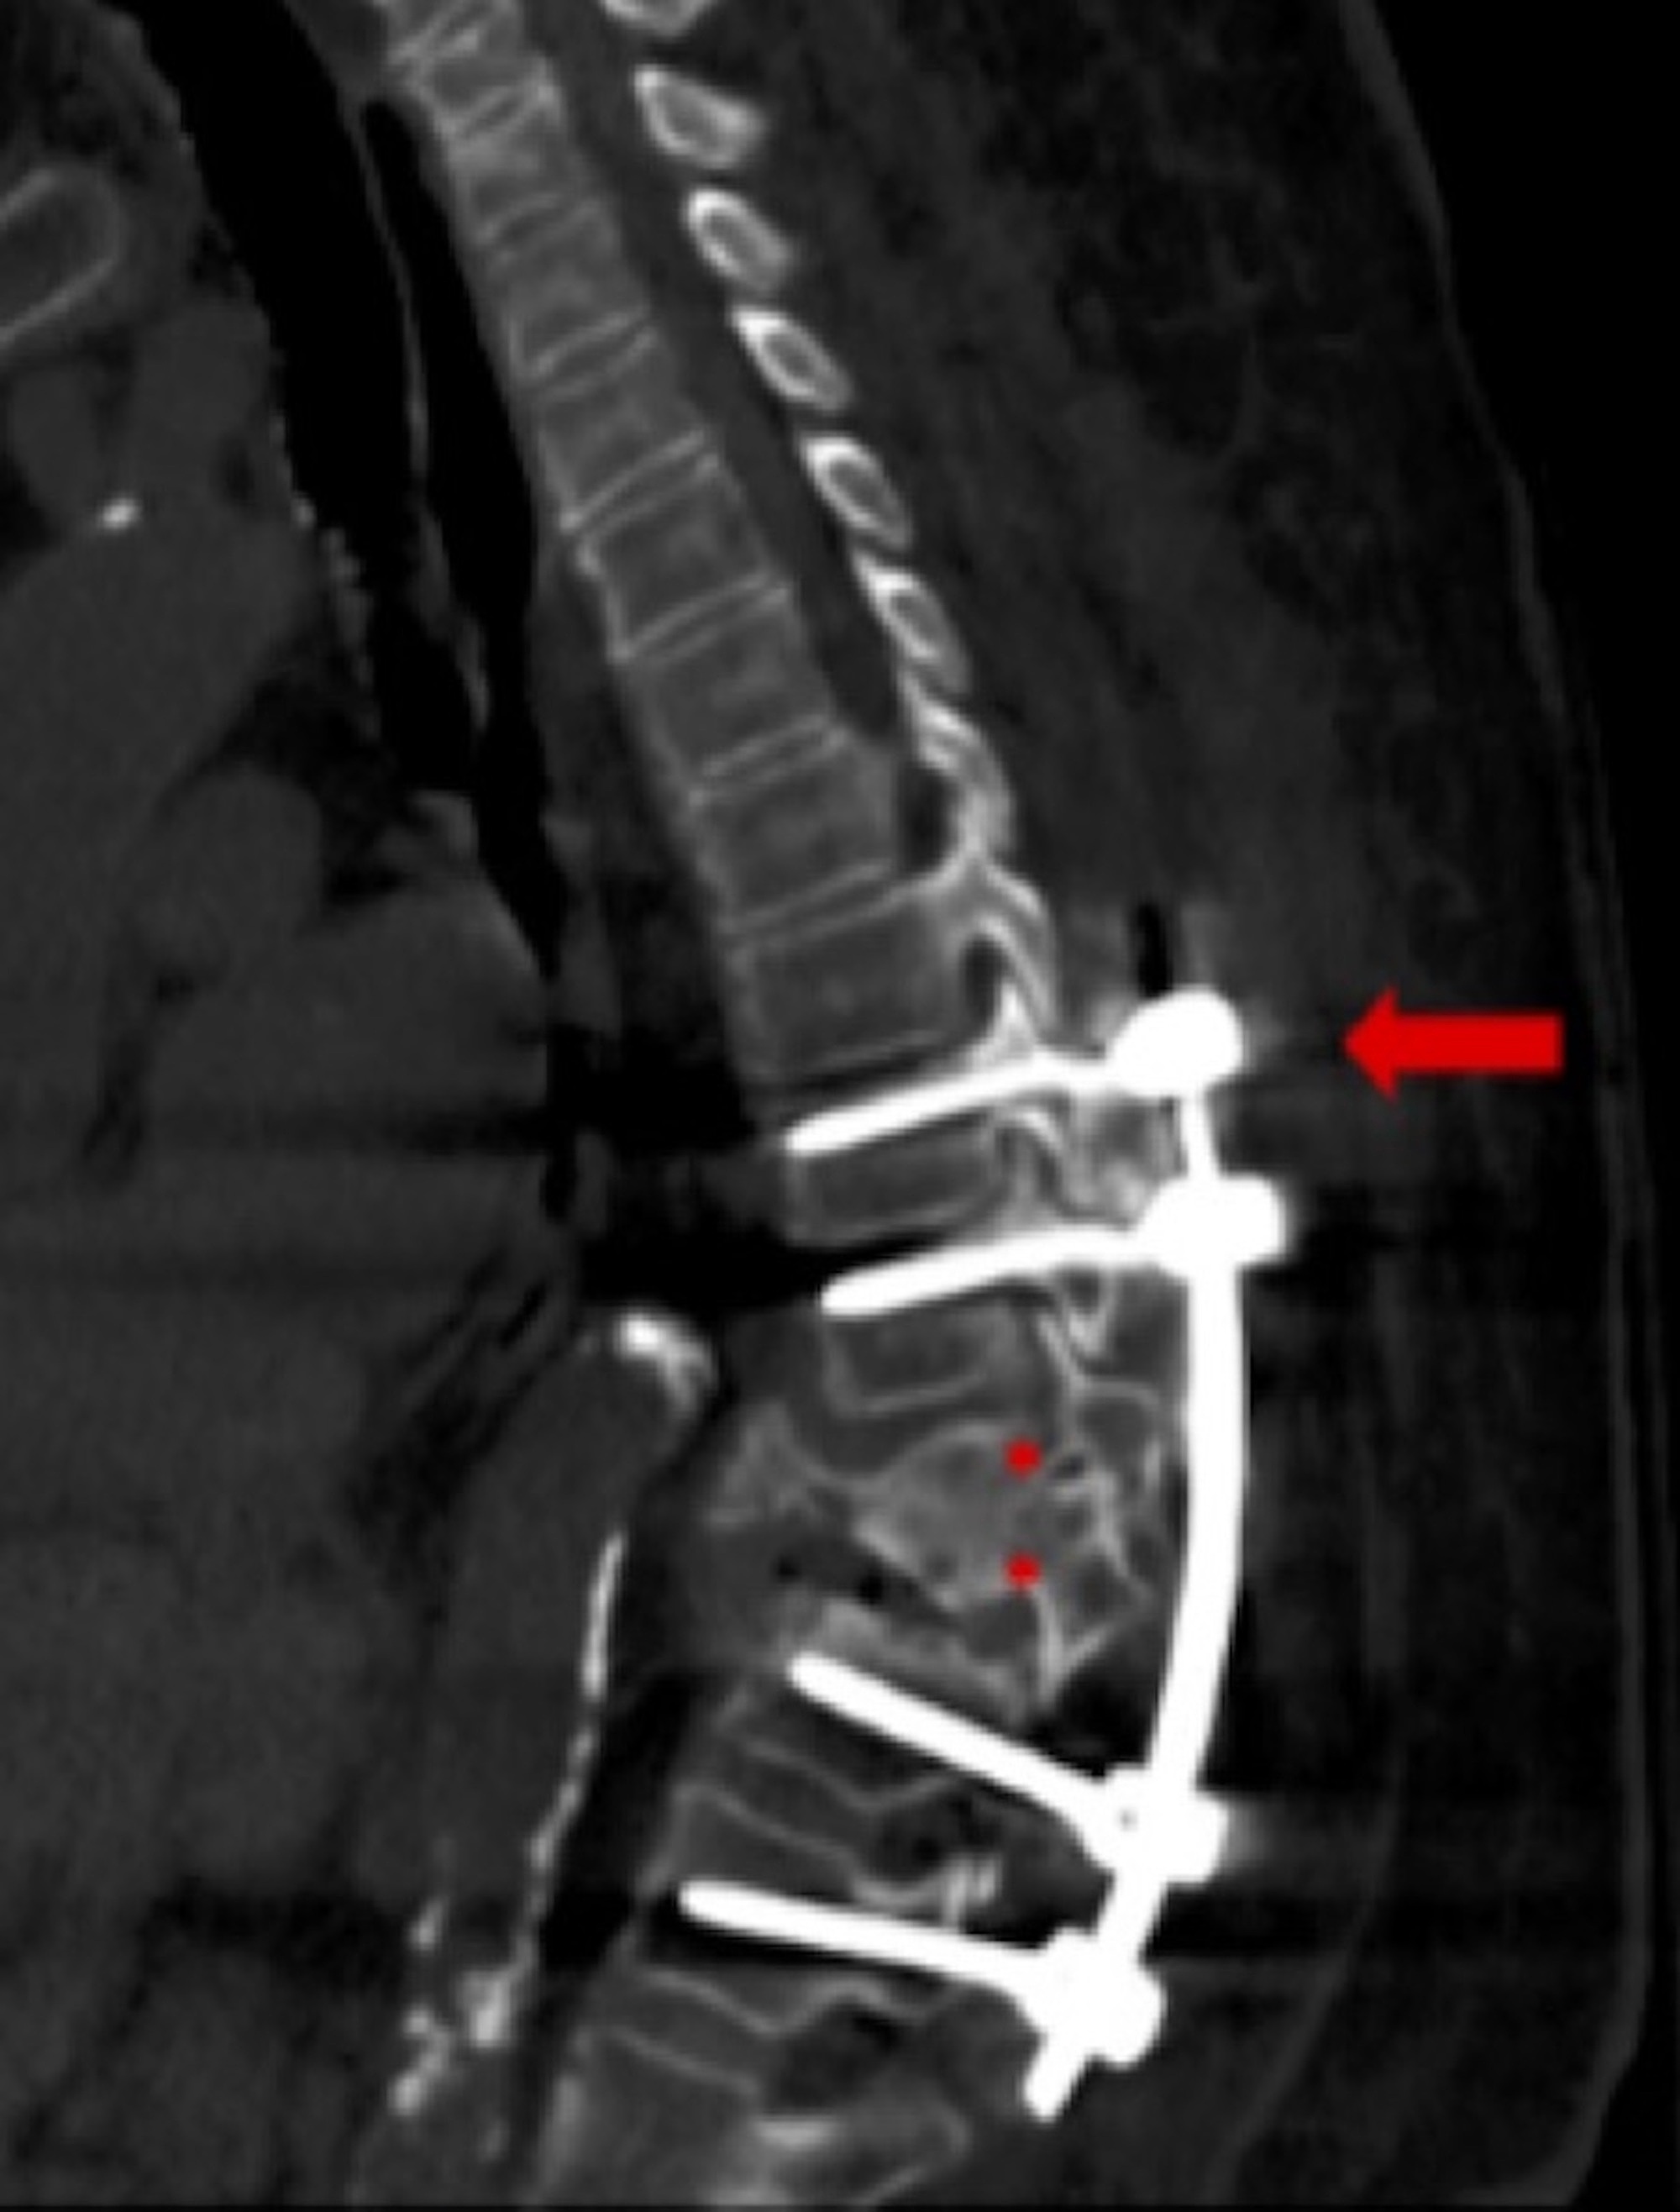 Duplication Of Vertebral Pedicles Associated With A Thoracic Burst Fracture Resulting In Spinal Cord Compression A Case Report Cureus